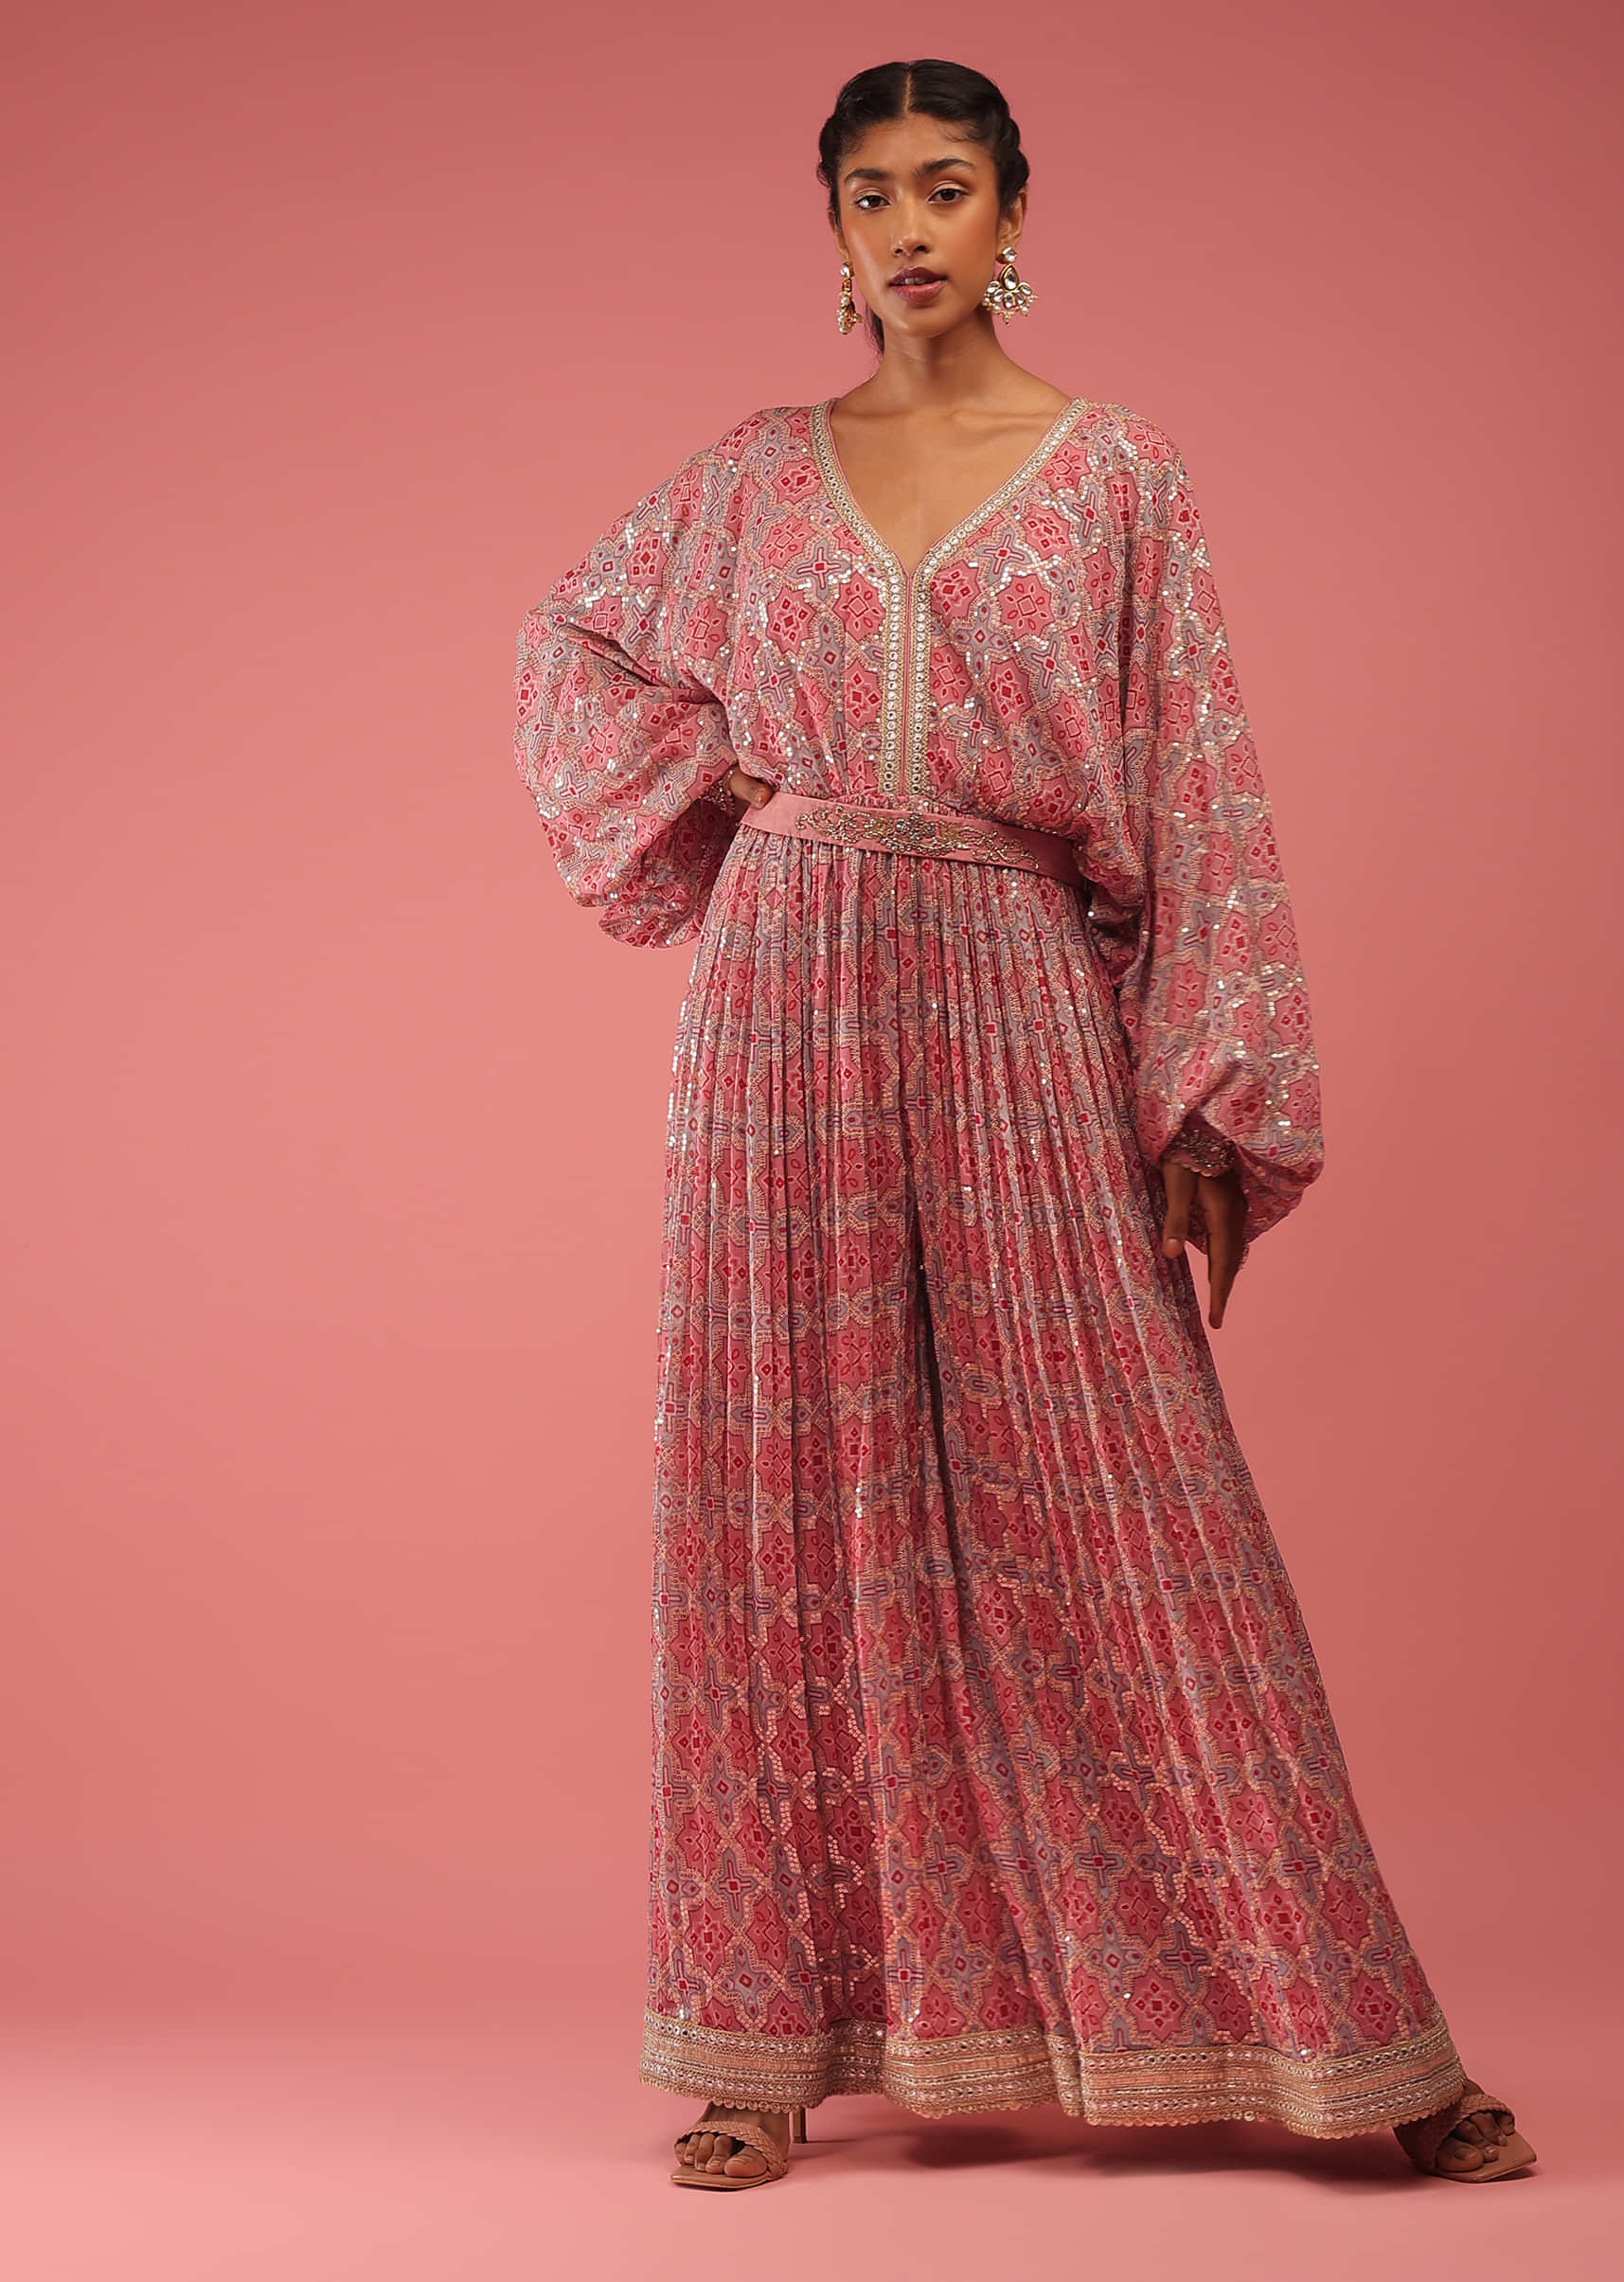 Mauve Pink Jumpsuit In Seamless Print With Golden Zari Embroidery, It Is Crafted In Organza With Balloon Sleeves